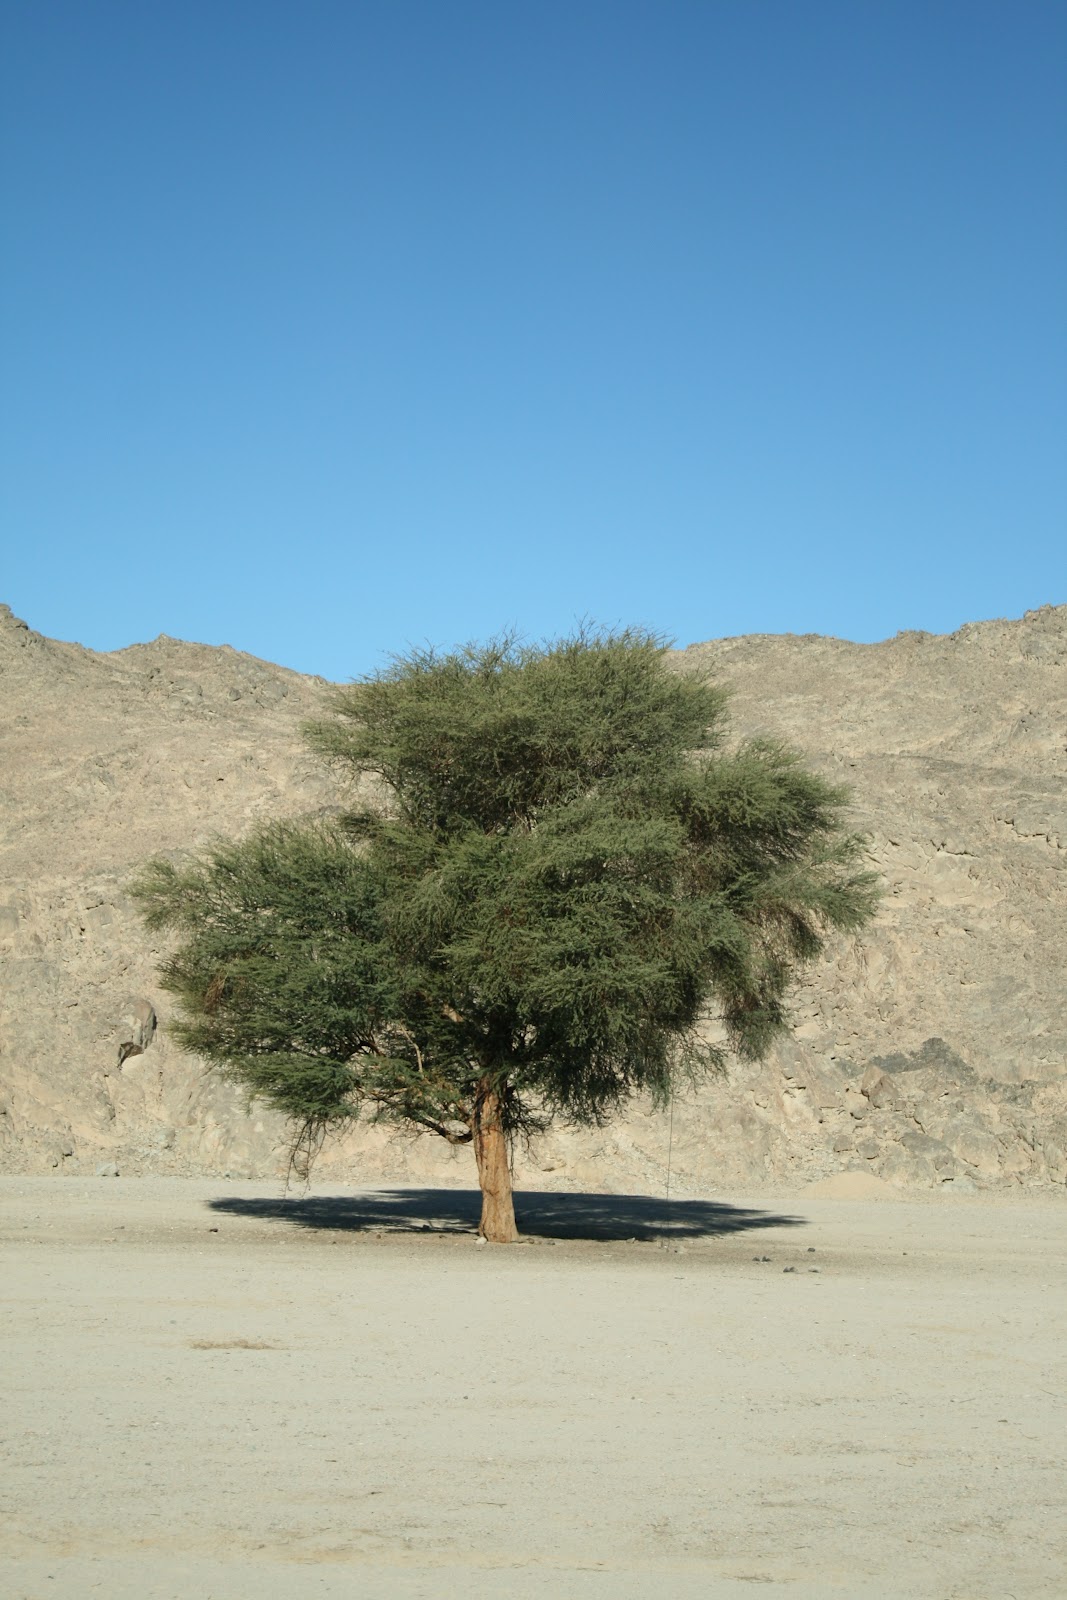 Amazing Wallpapers: Desert trees pictures, desert tree, plant pictures